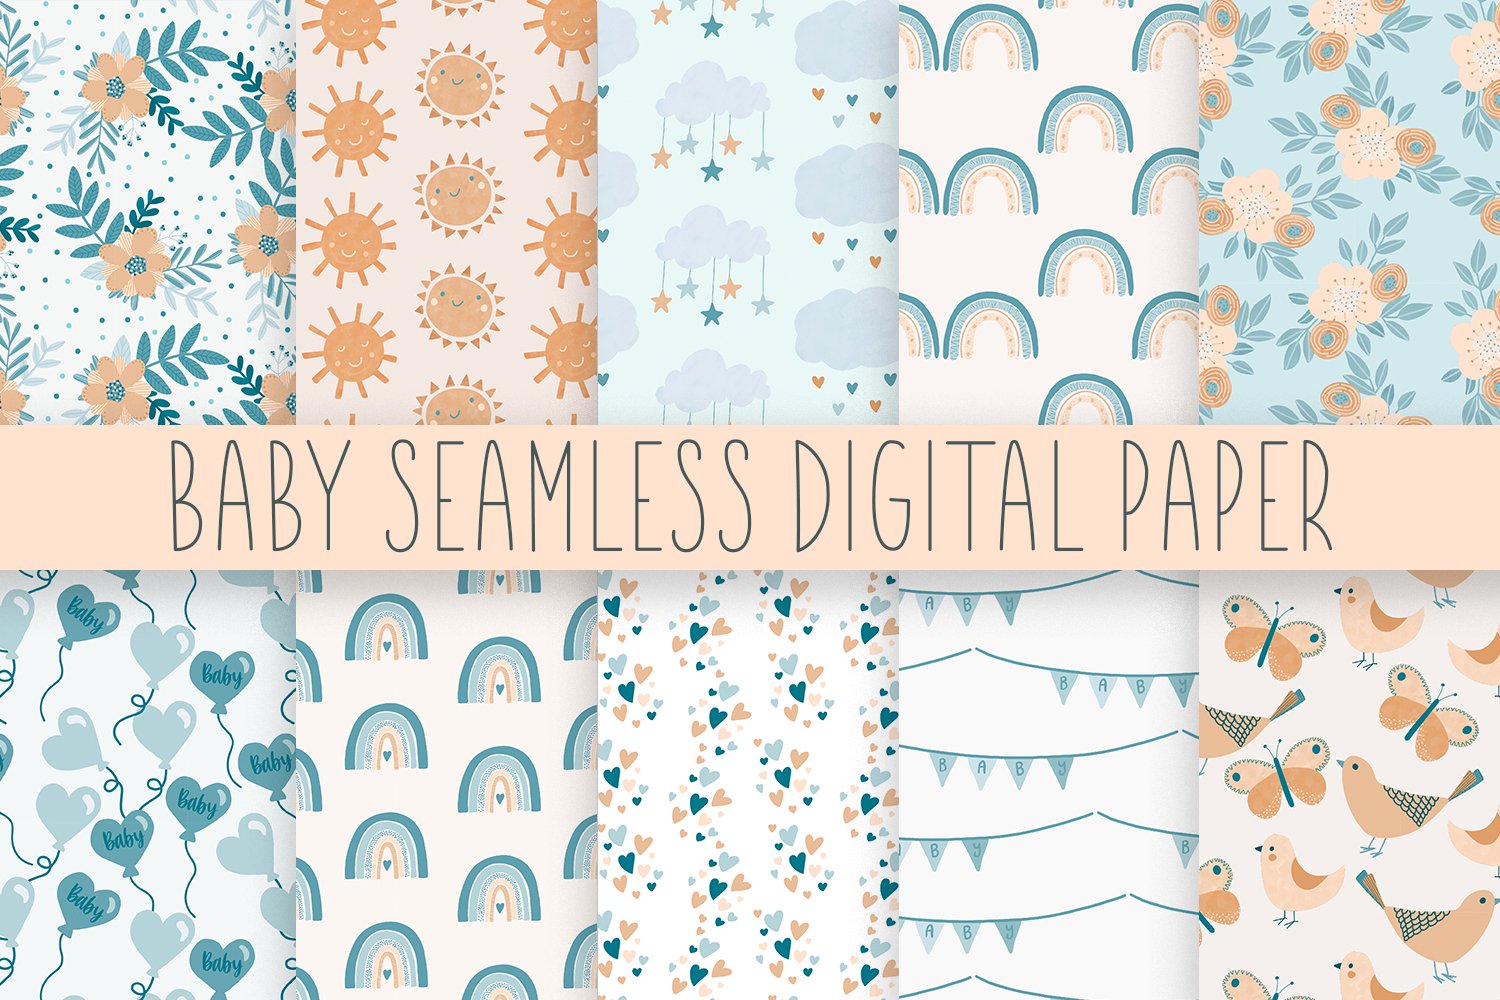 Baby Seamless Patterns Digital Paper cover image.